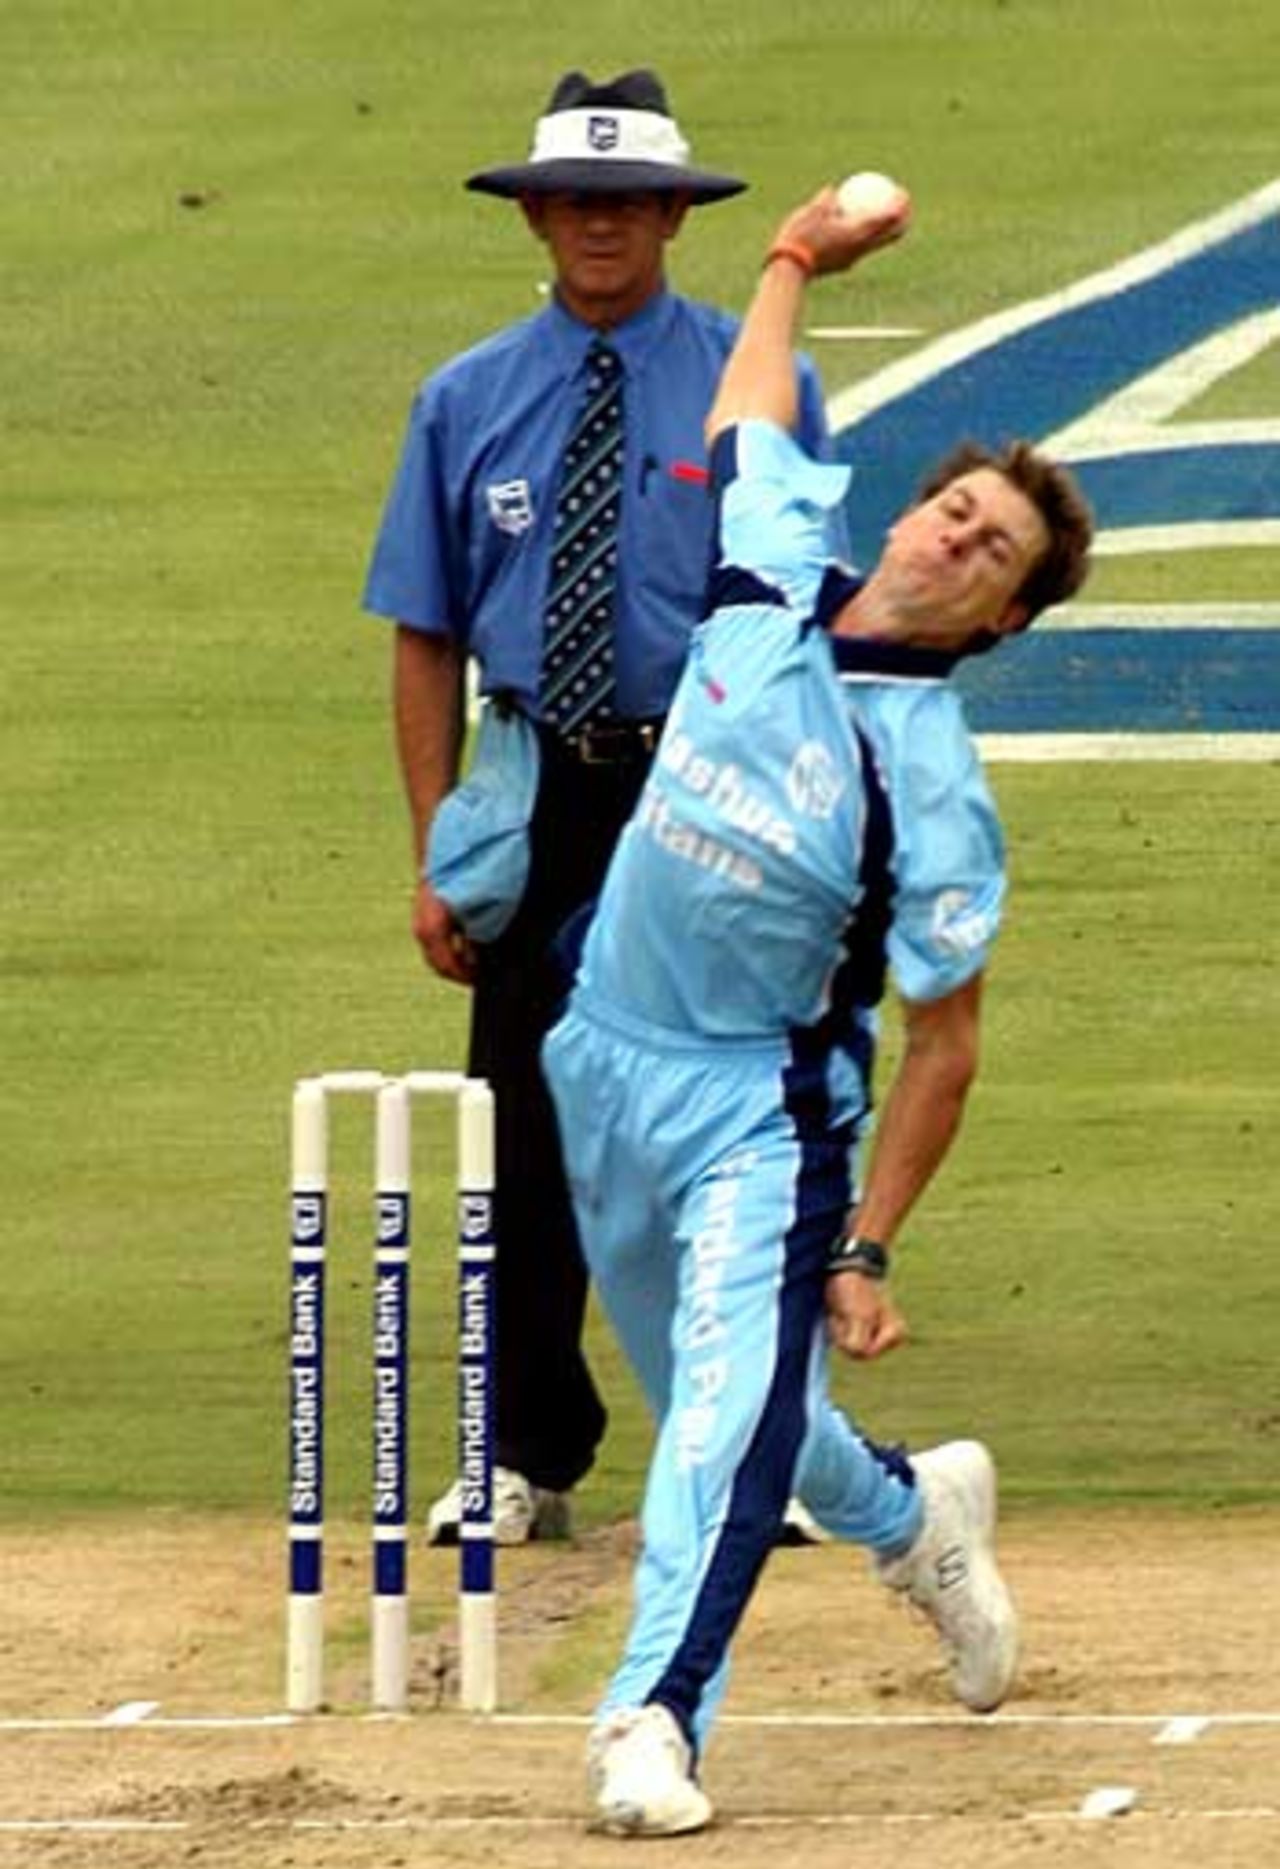 Dale Steyn lets fly another delivery, Titans v Dolphins, 2nd Semi Final Standard Bank Cup, Centurion, January 8, 2005